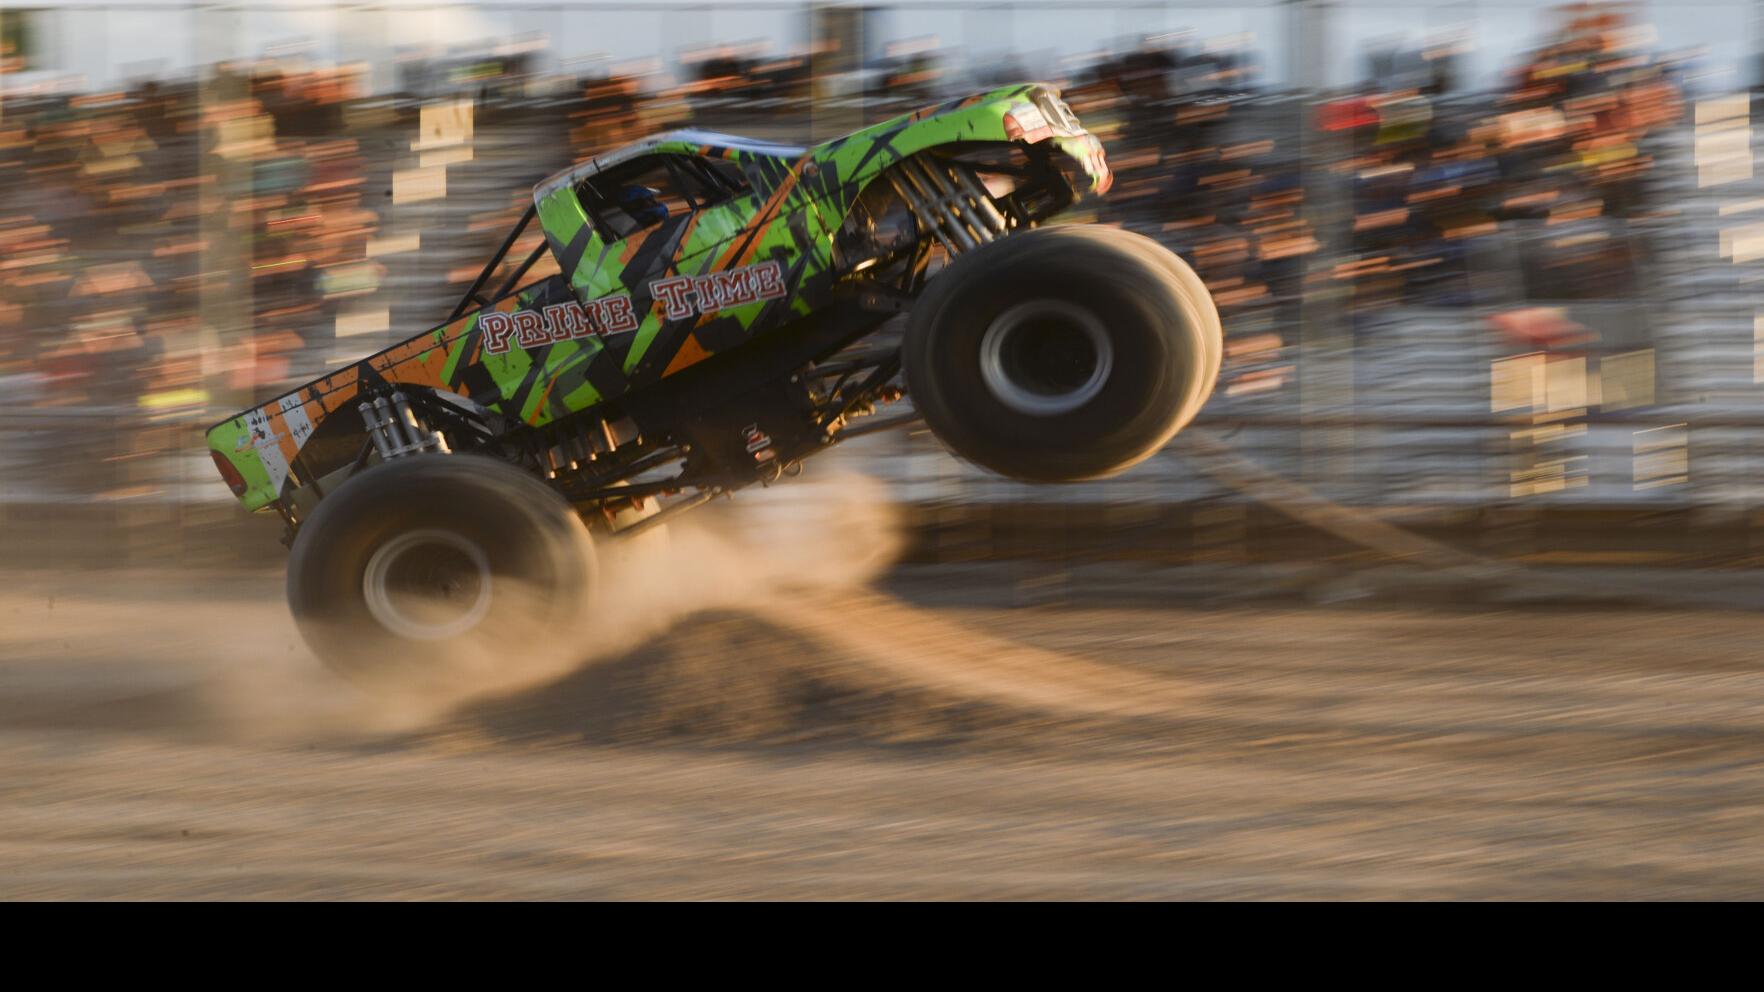 RESCHEDULED: Monster Trucks are Coming to Hawkeye Downs!